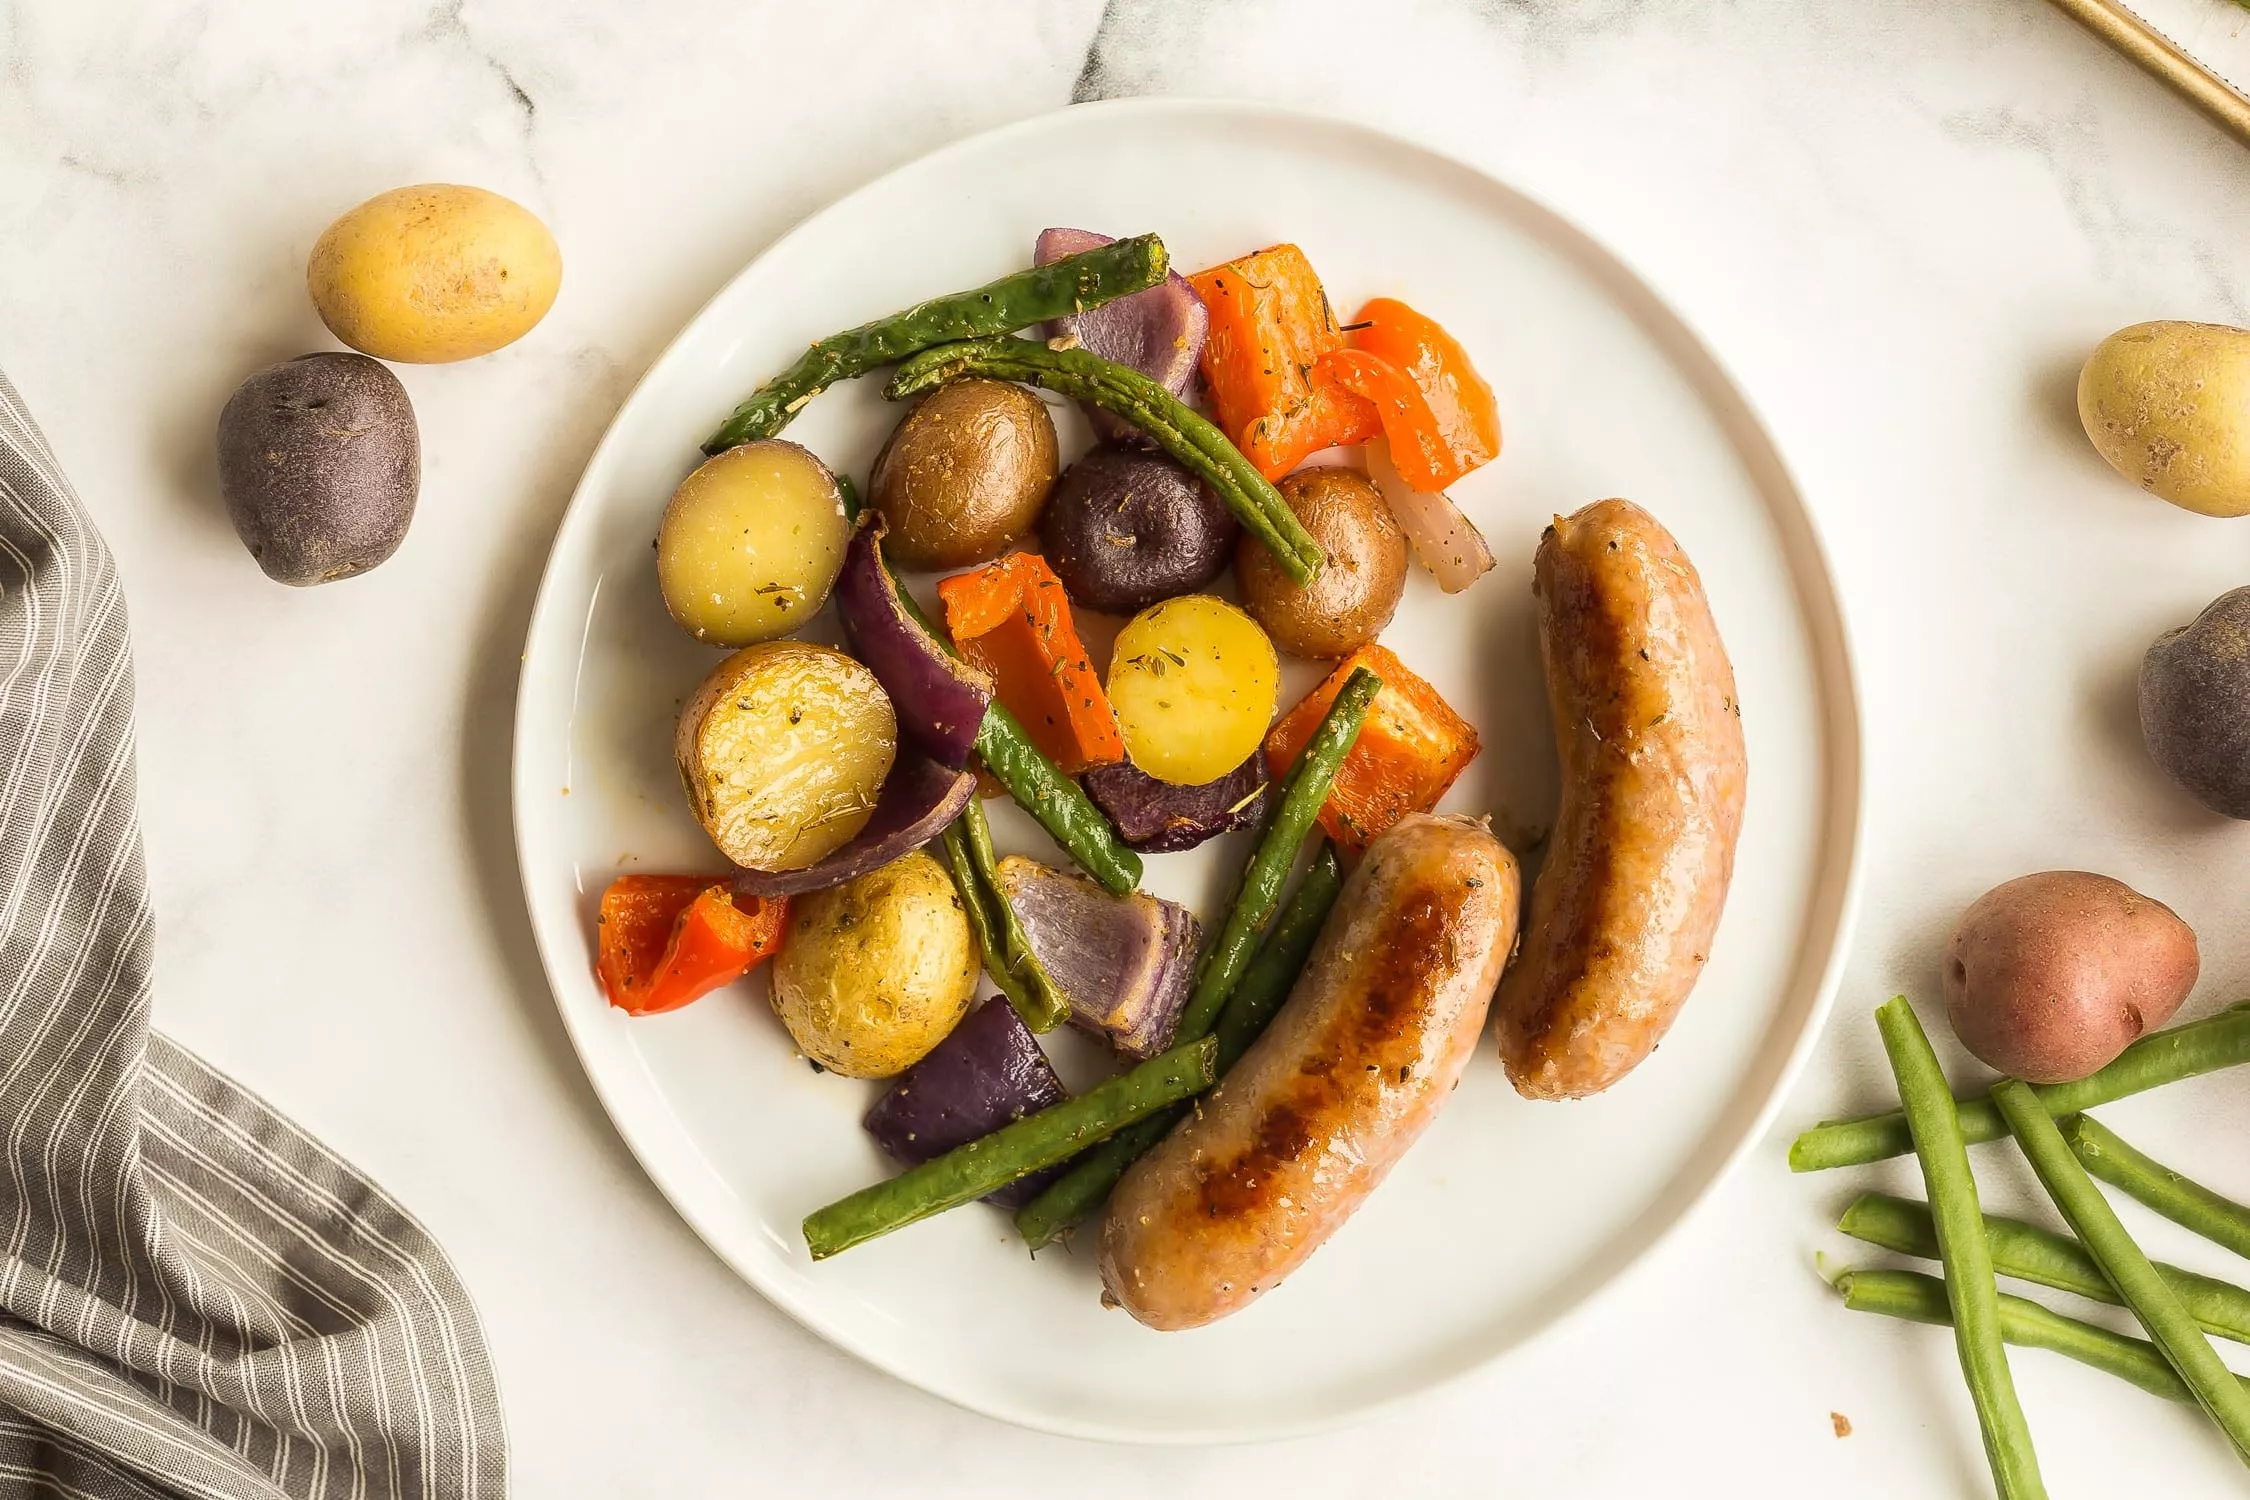 A plate of sheet pan sausages and potatoes.